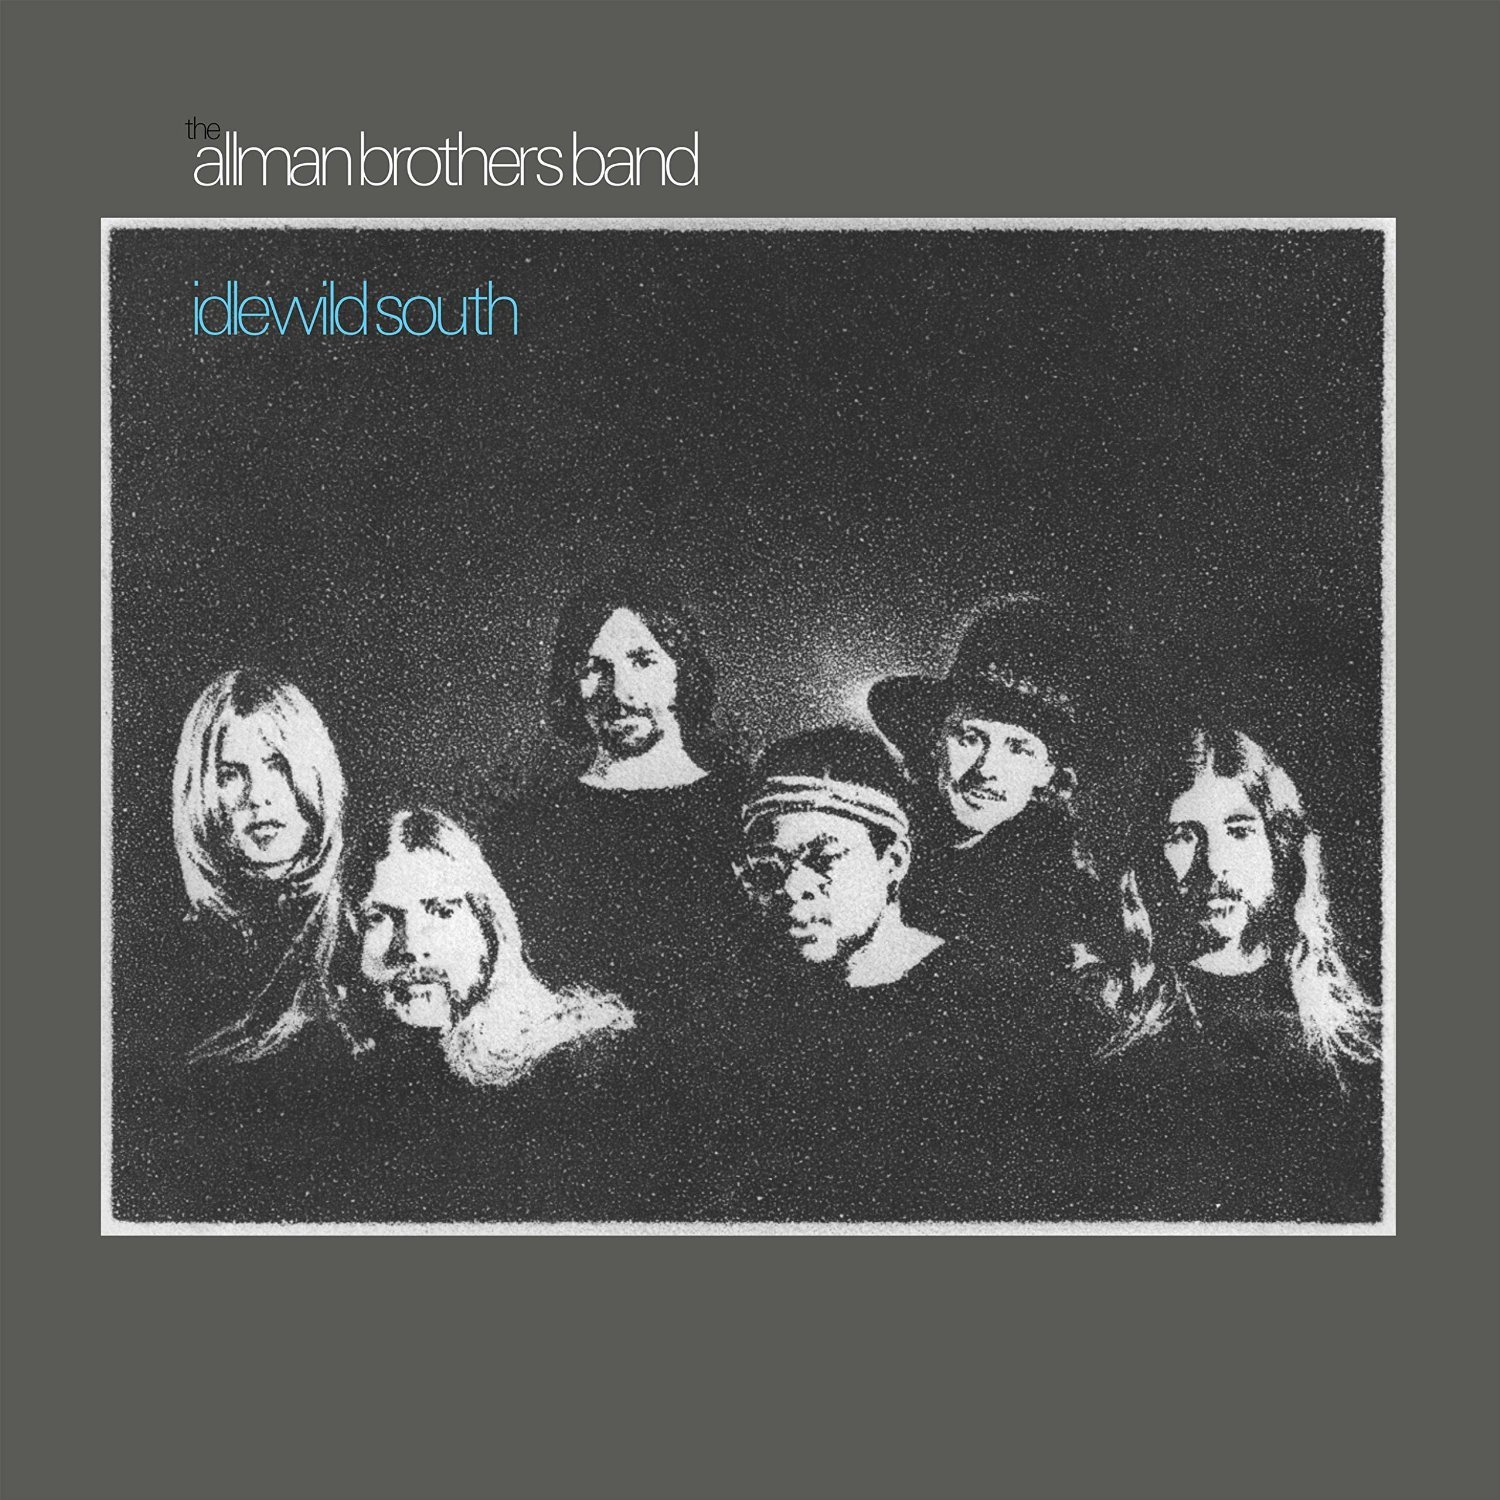 The Allman Brothers Band – Idlewild South (1970) {Deluxe Edition Remastered 2015} [HDTracks FLAC 24bit/96kHz]